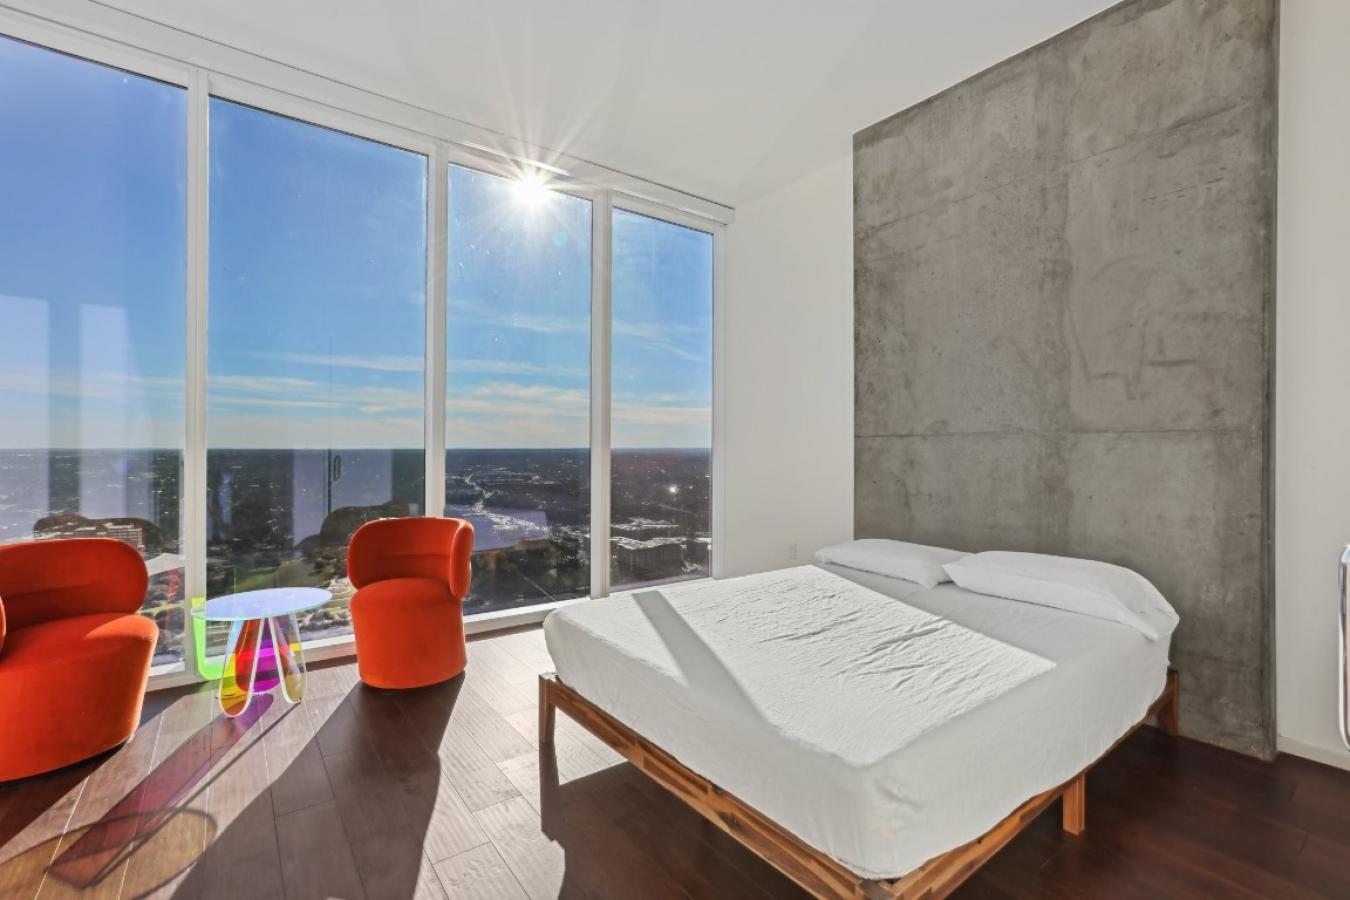 301 West Avenue 3906, Austin, Texas, 78701, United States, 1 Bedroom Bedrooms, ,1 BathroomBathrooms,Residential,For Sale,301 West Avenue 3906,1497241